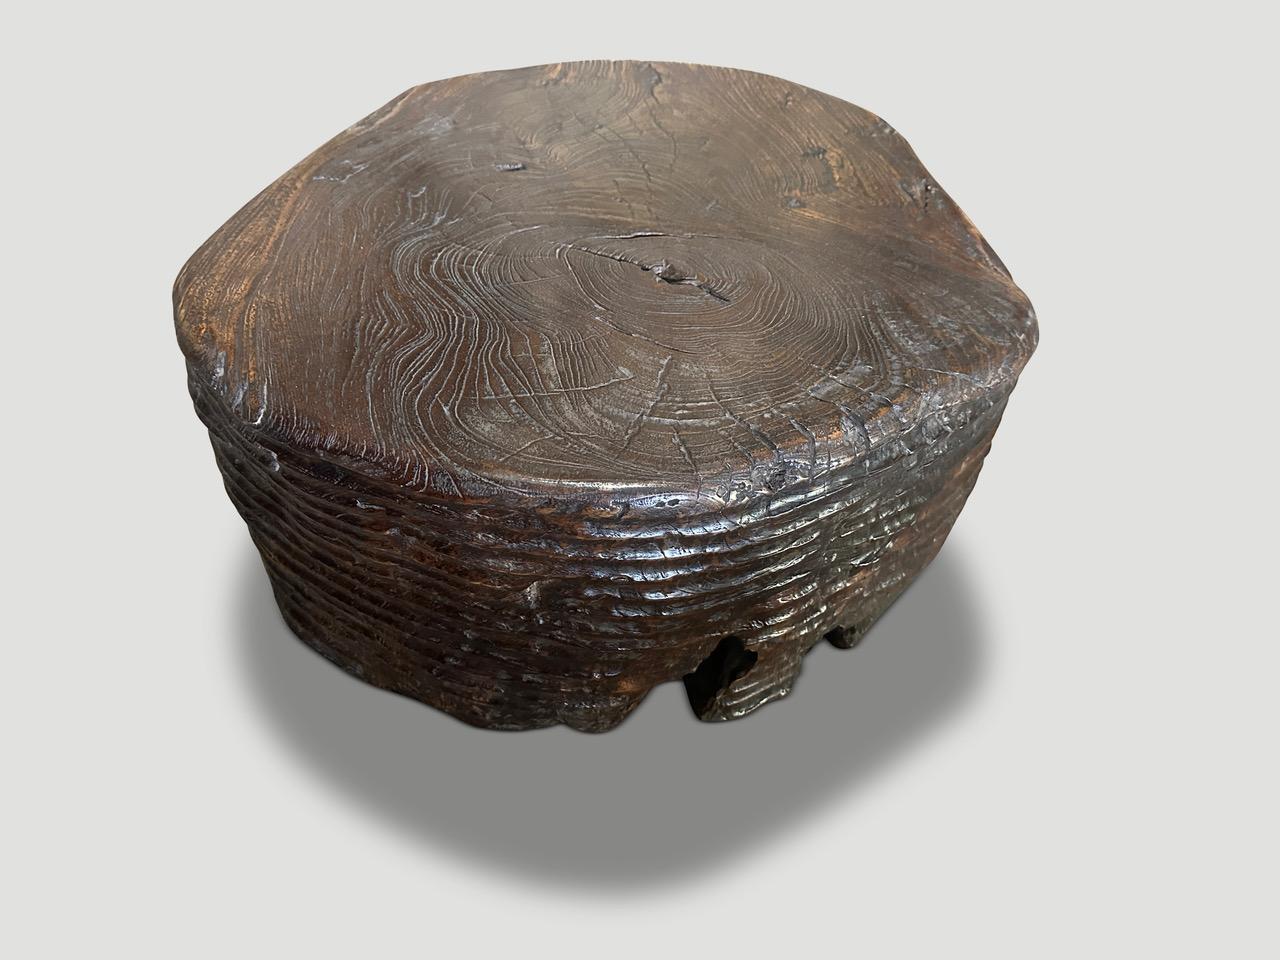 Stunningly beautiful century old teak wood coffee table featuring our unique minimalist carving. The sides of this ancient teak root are hand carved by our master wood carver. We added a chocolate translucent stain revealing the beautiful rare wood